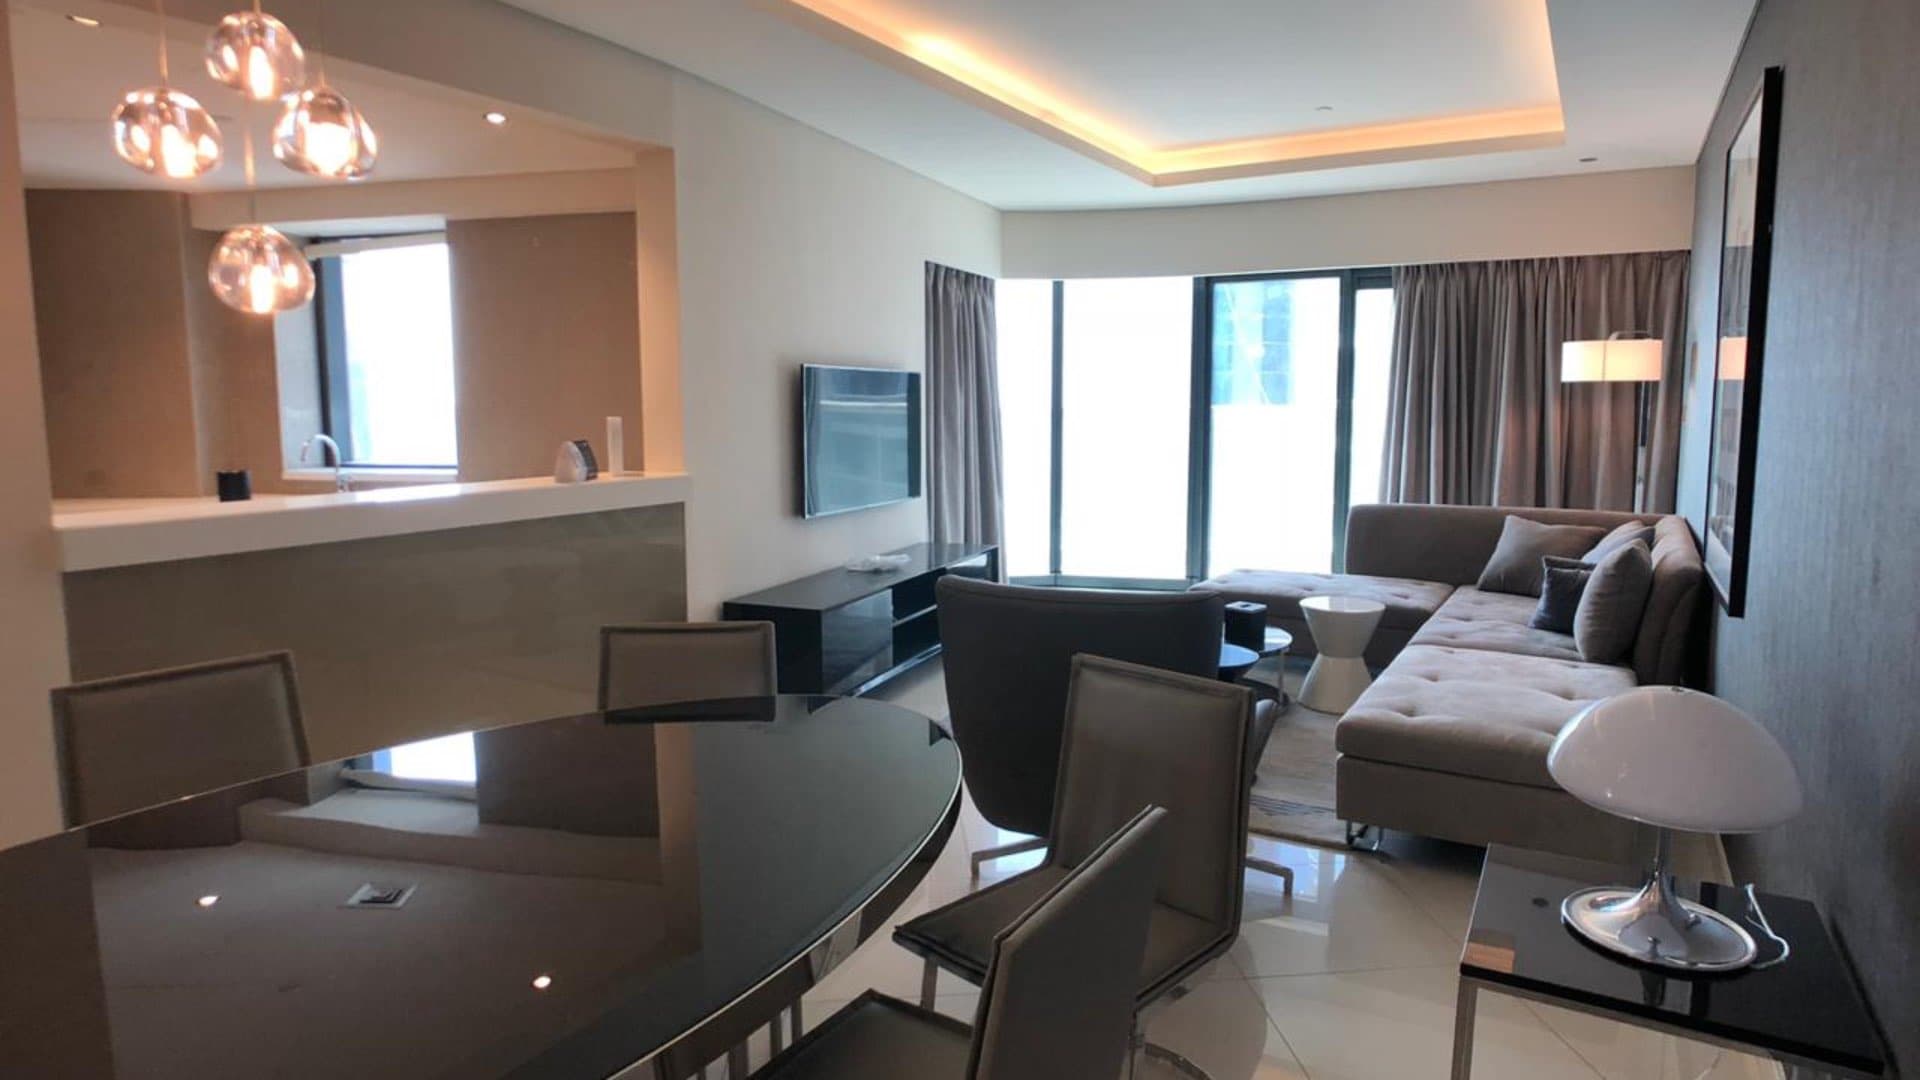 2 Bedroom Apartment For Sale Damac Towers By Paramount Lp09996 3021bbaeb26f9600.jpeg